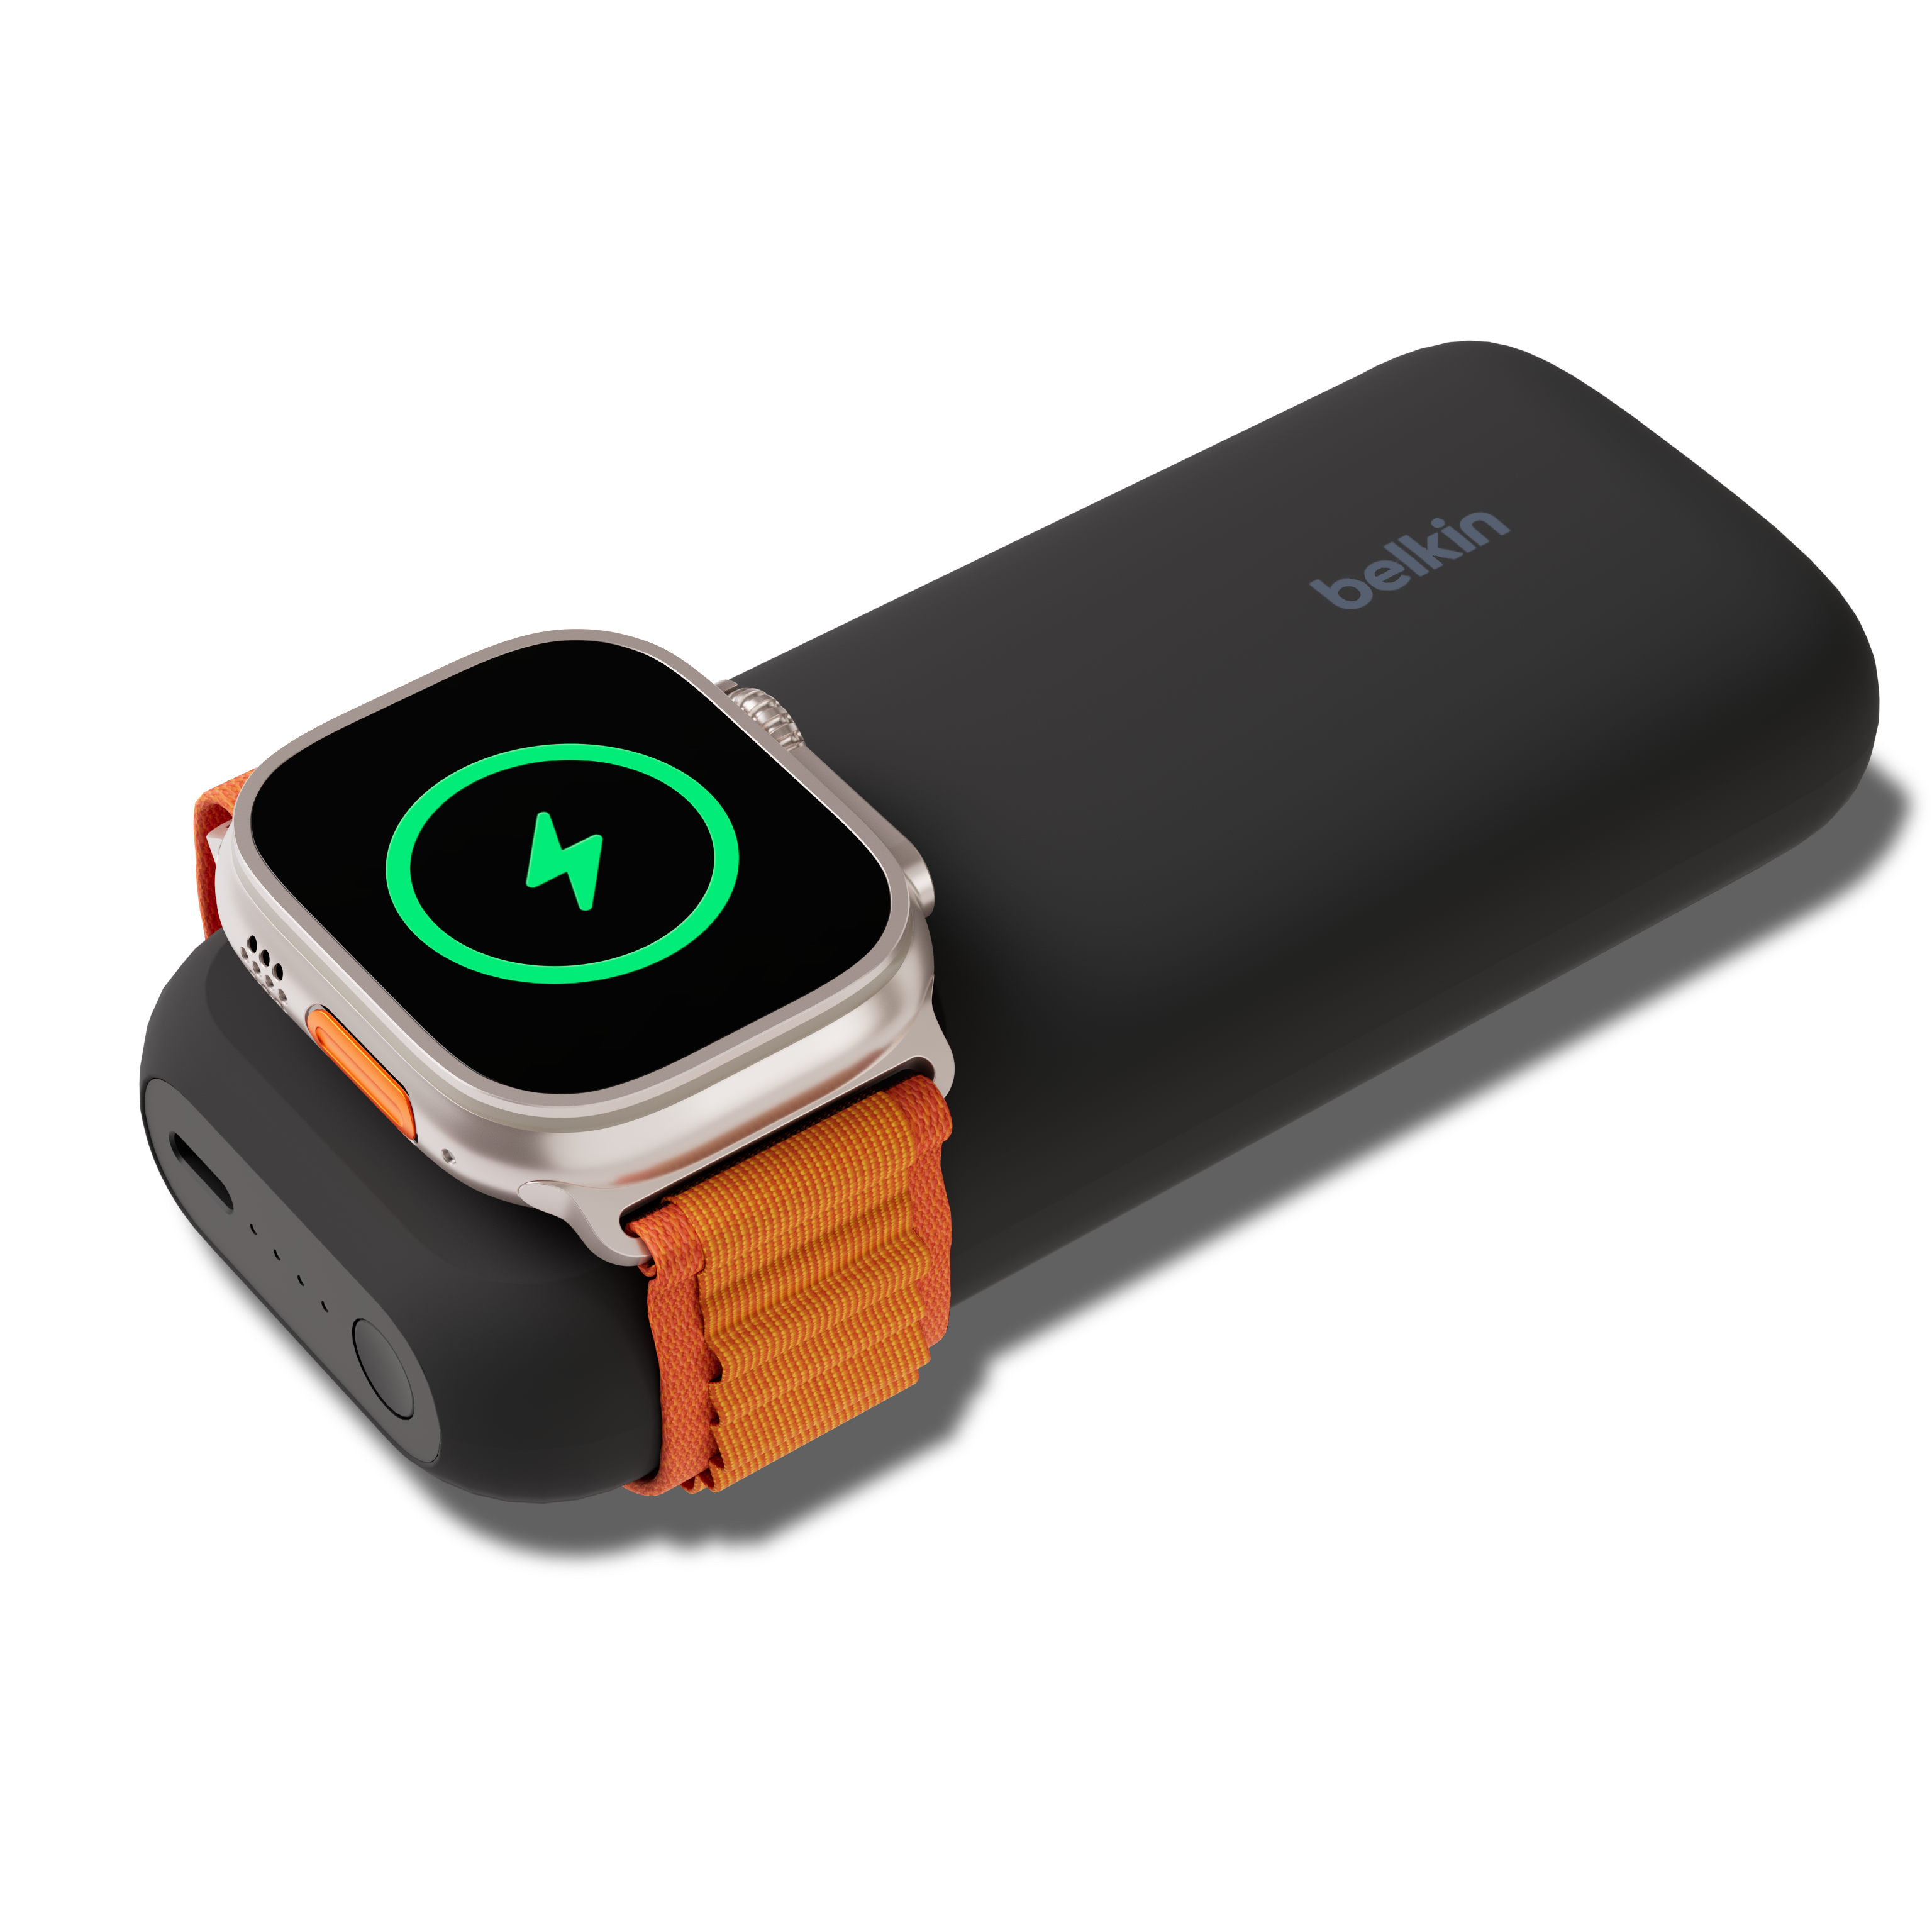 Apple Watch、iPhone向けモバイルバッテリー「BoostCharge Pro 2-in-1」を発売